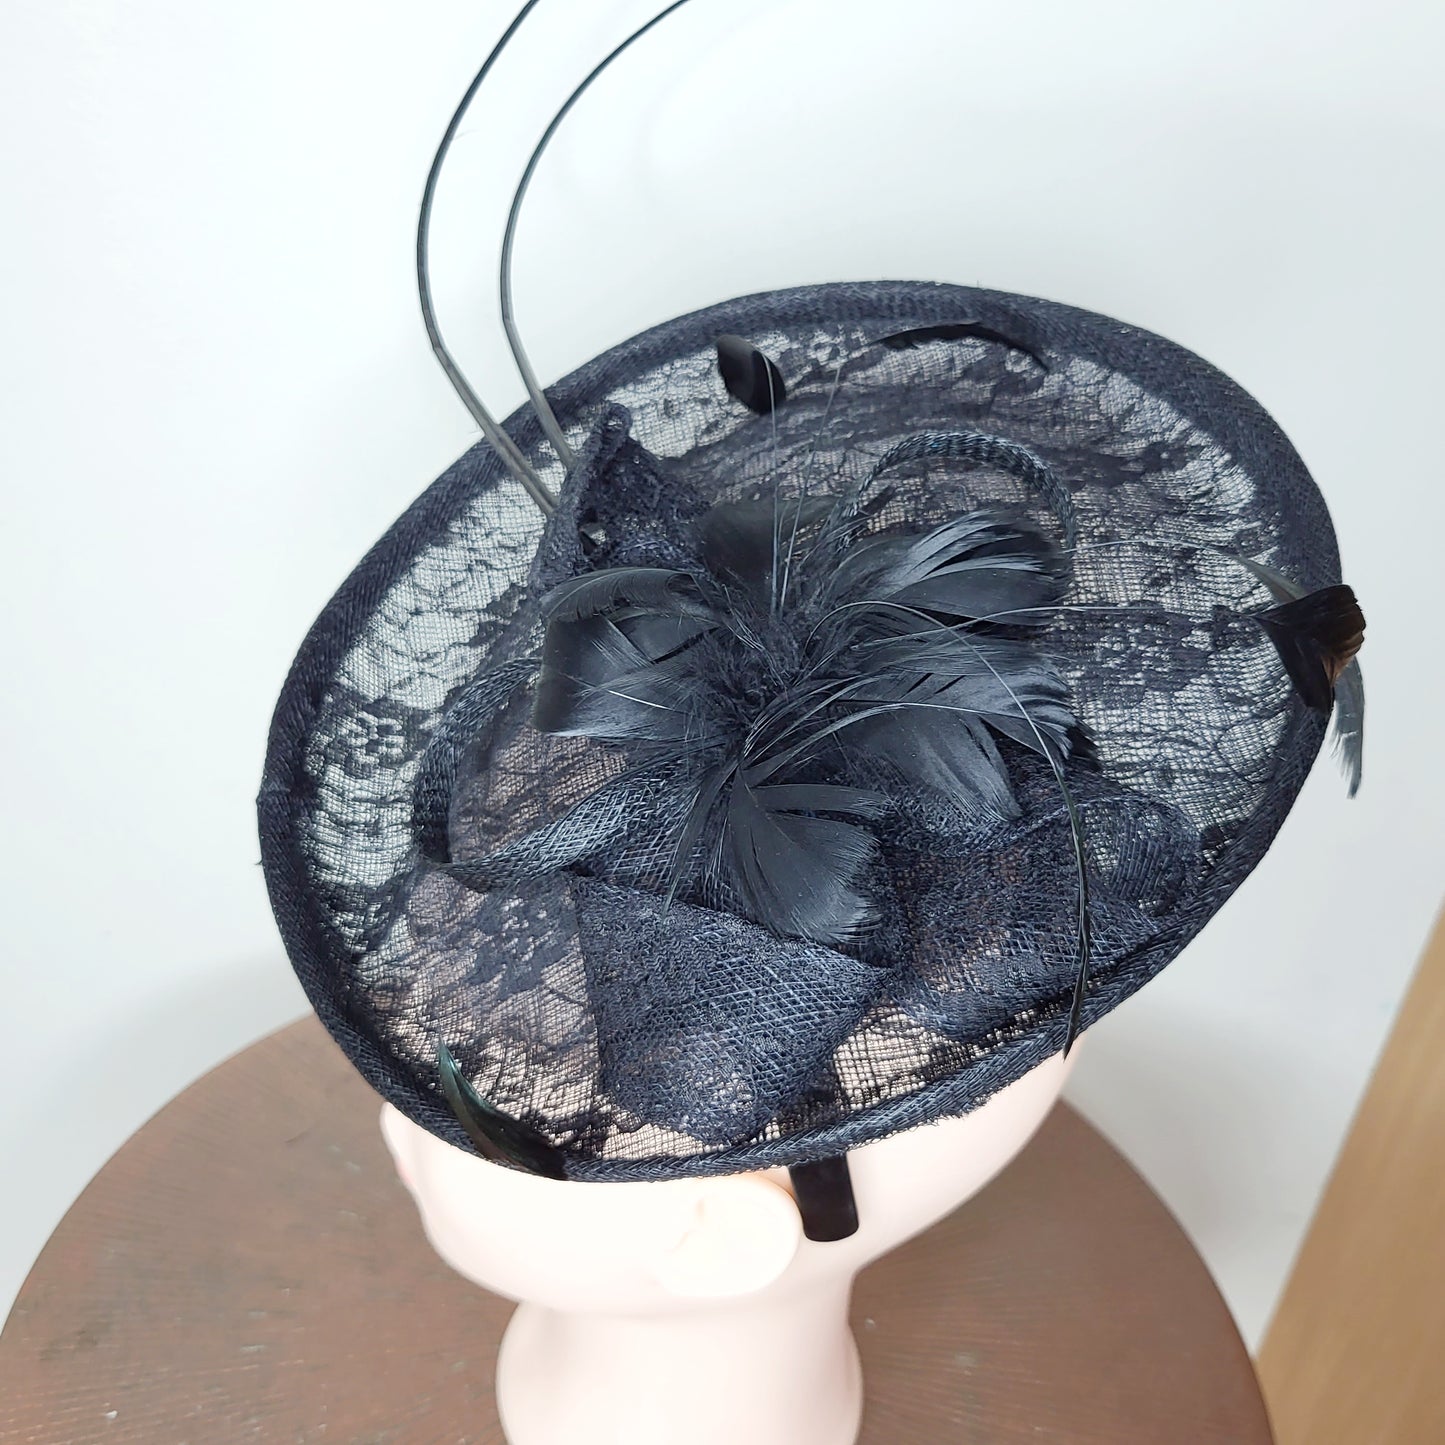 RWDZ1 - Black straw fascinator style hat with feathers (actually on a headband), good condition